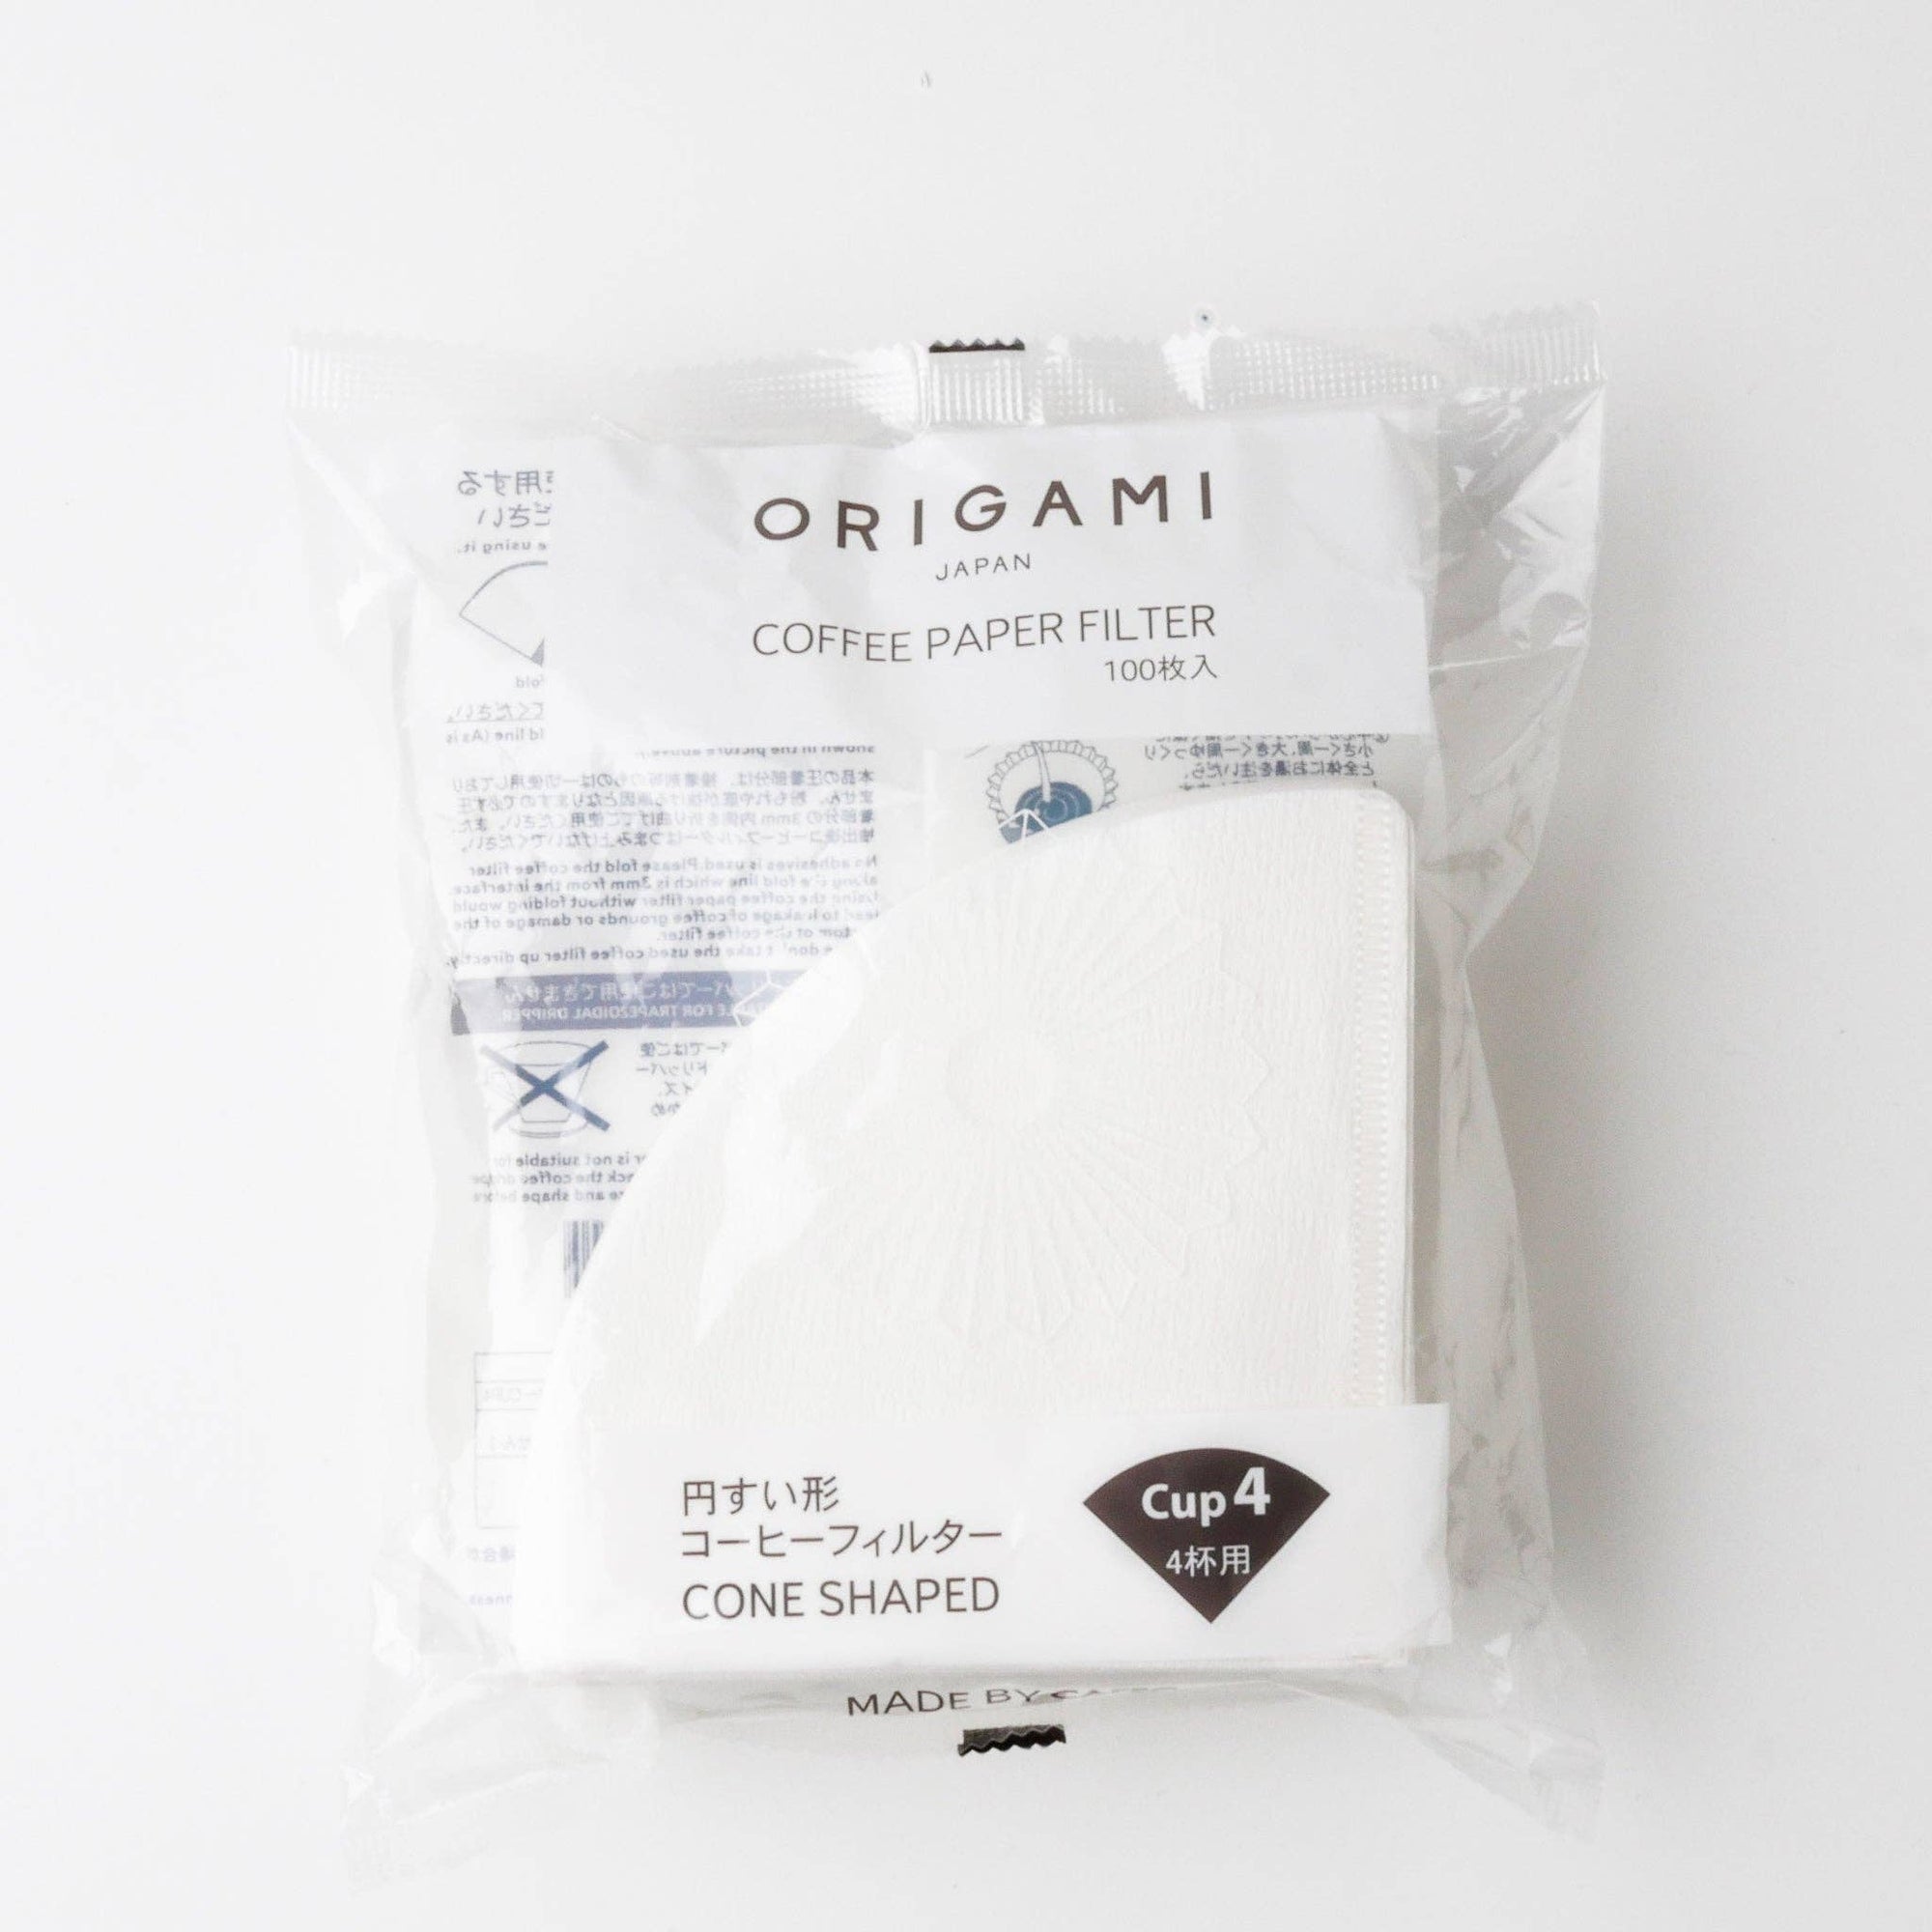 ORIGAMI Original Pour Over Coffee Paper Filter - Space Camp